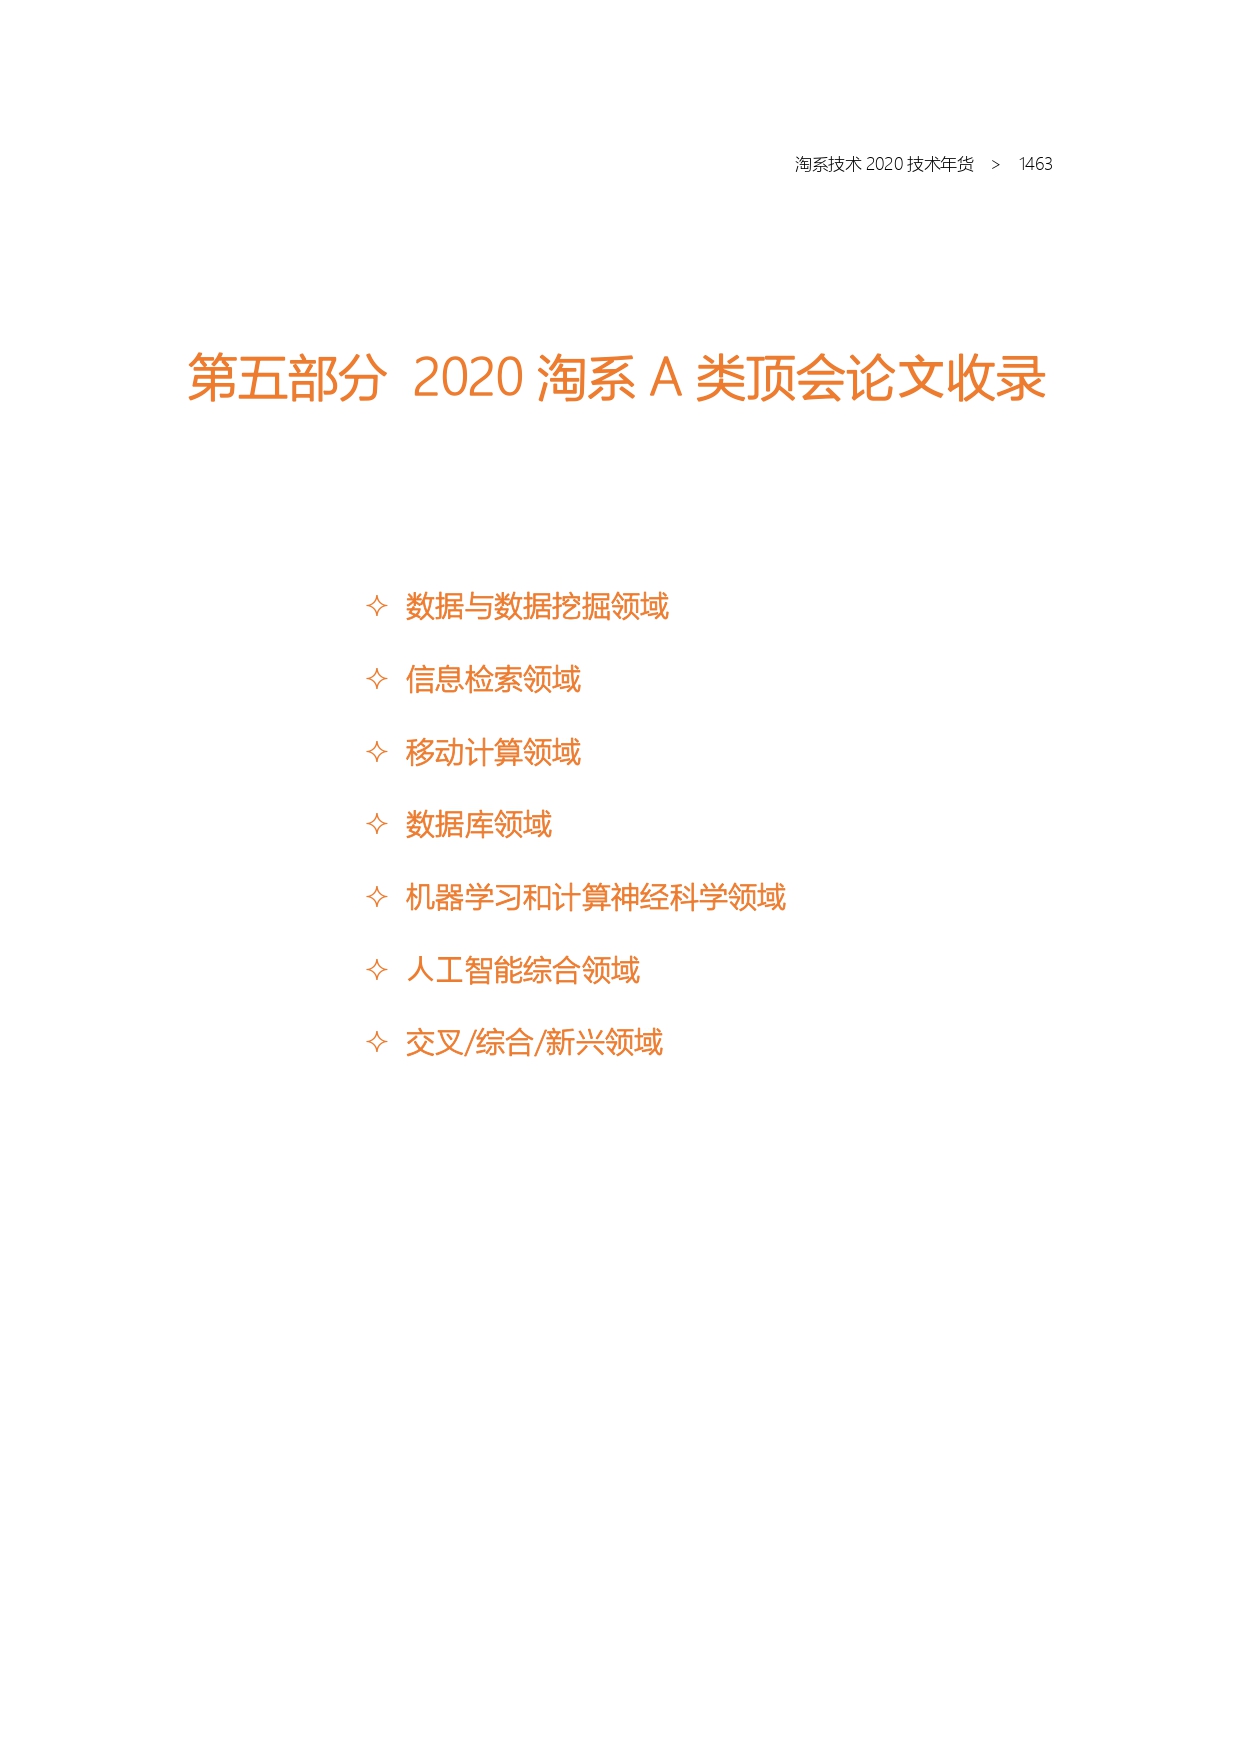 The Complete Works of Tao Technology 2020-1313-1671-1-195_page-0151.jpg